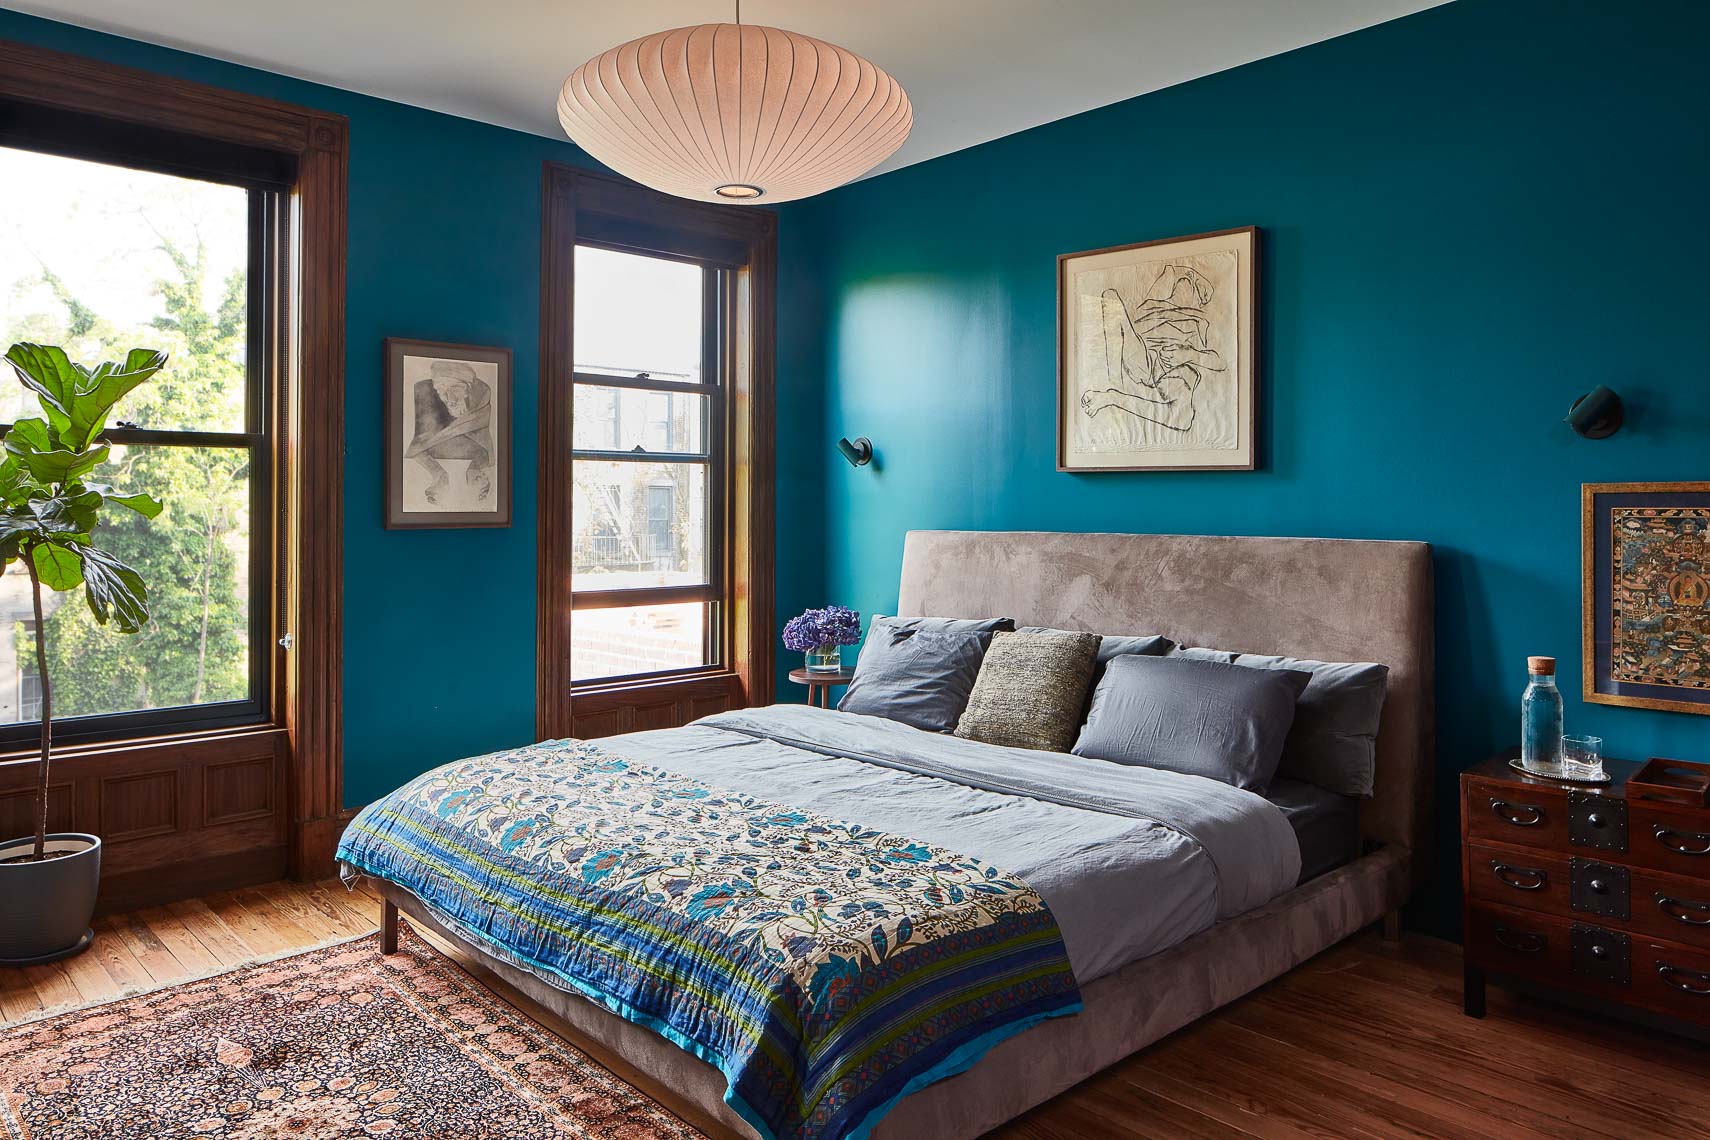 Master bedroom with turquoise walls and modern decor